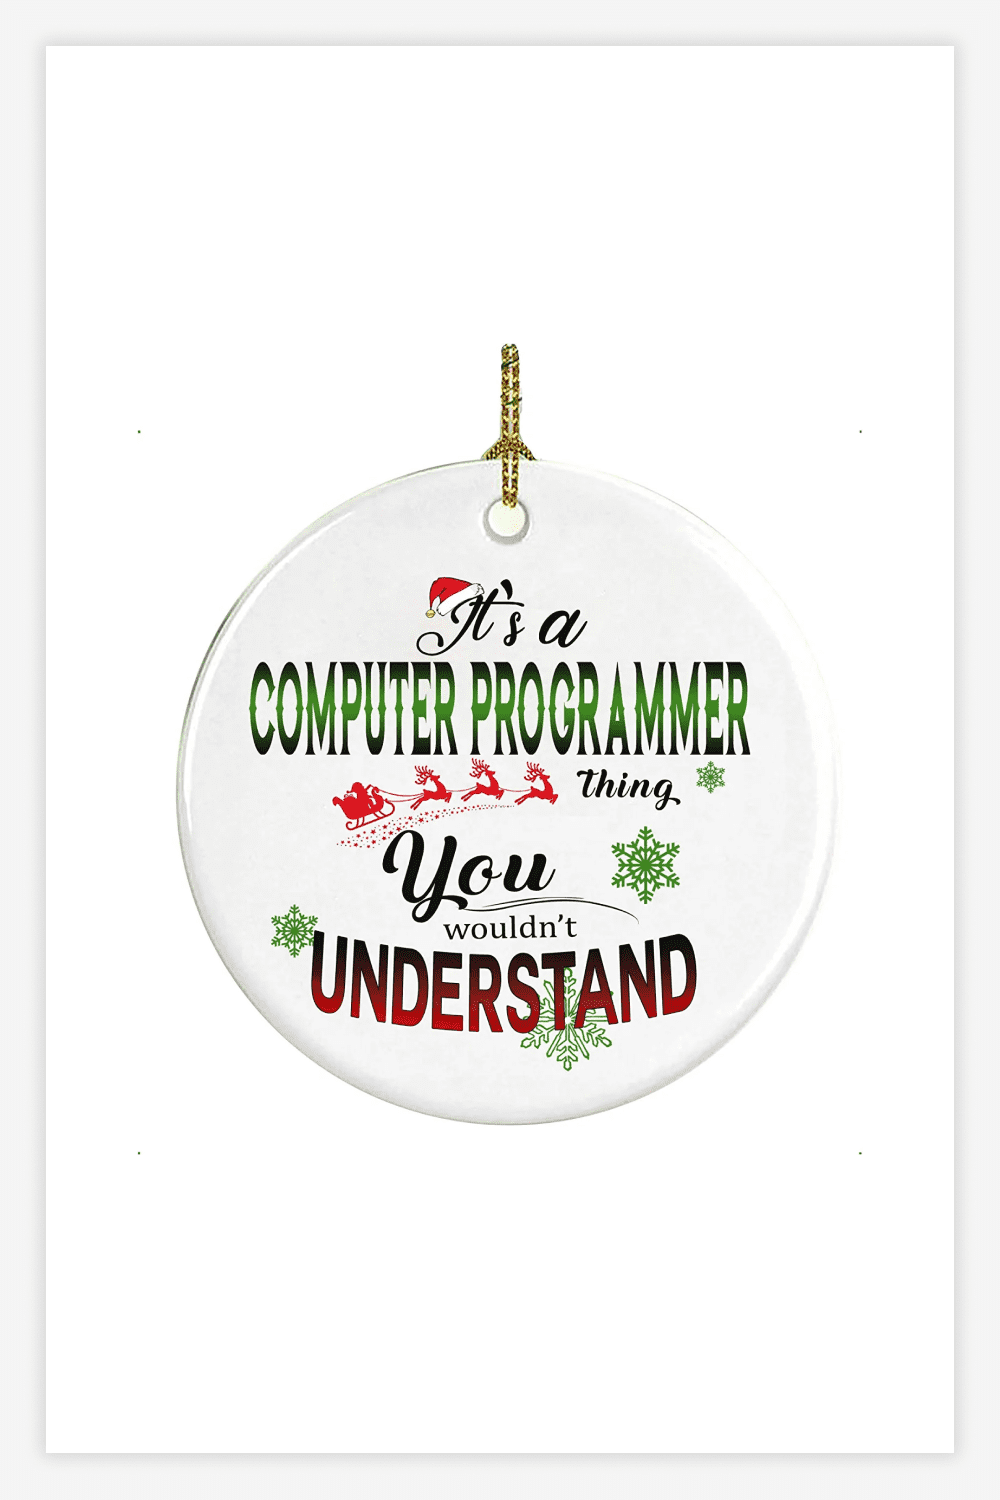 5 EDC Gifts For Programmers for the Holidays - ThatSoftwareDude.com